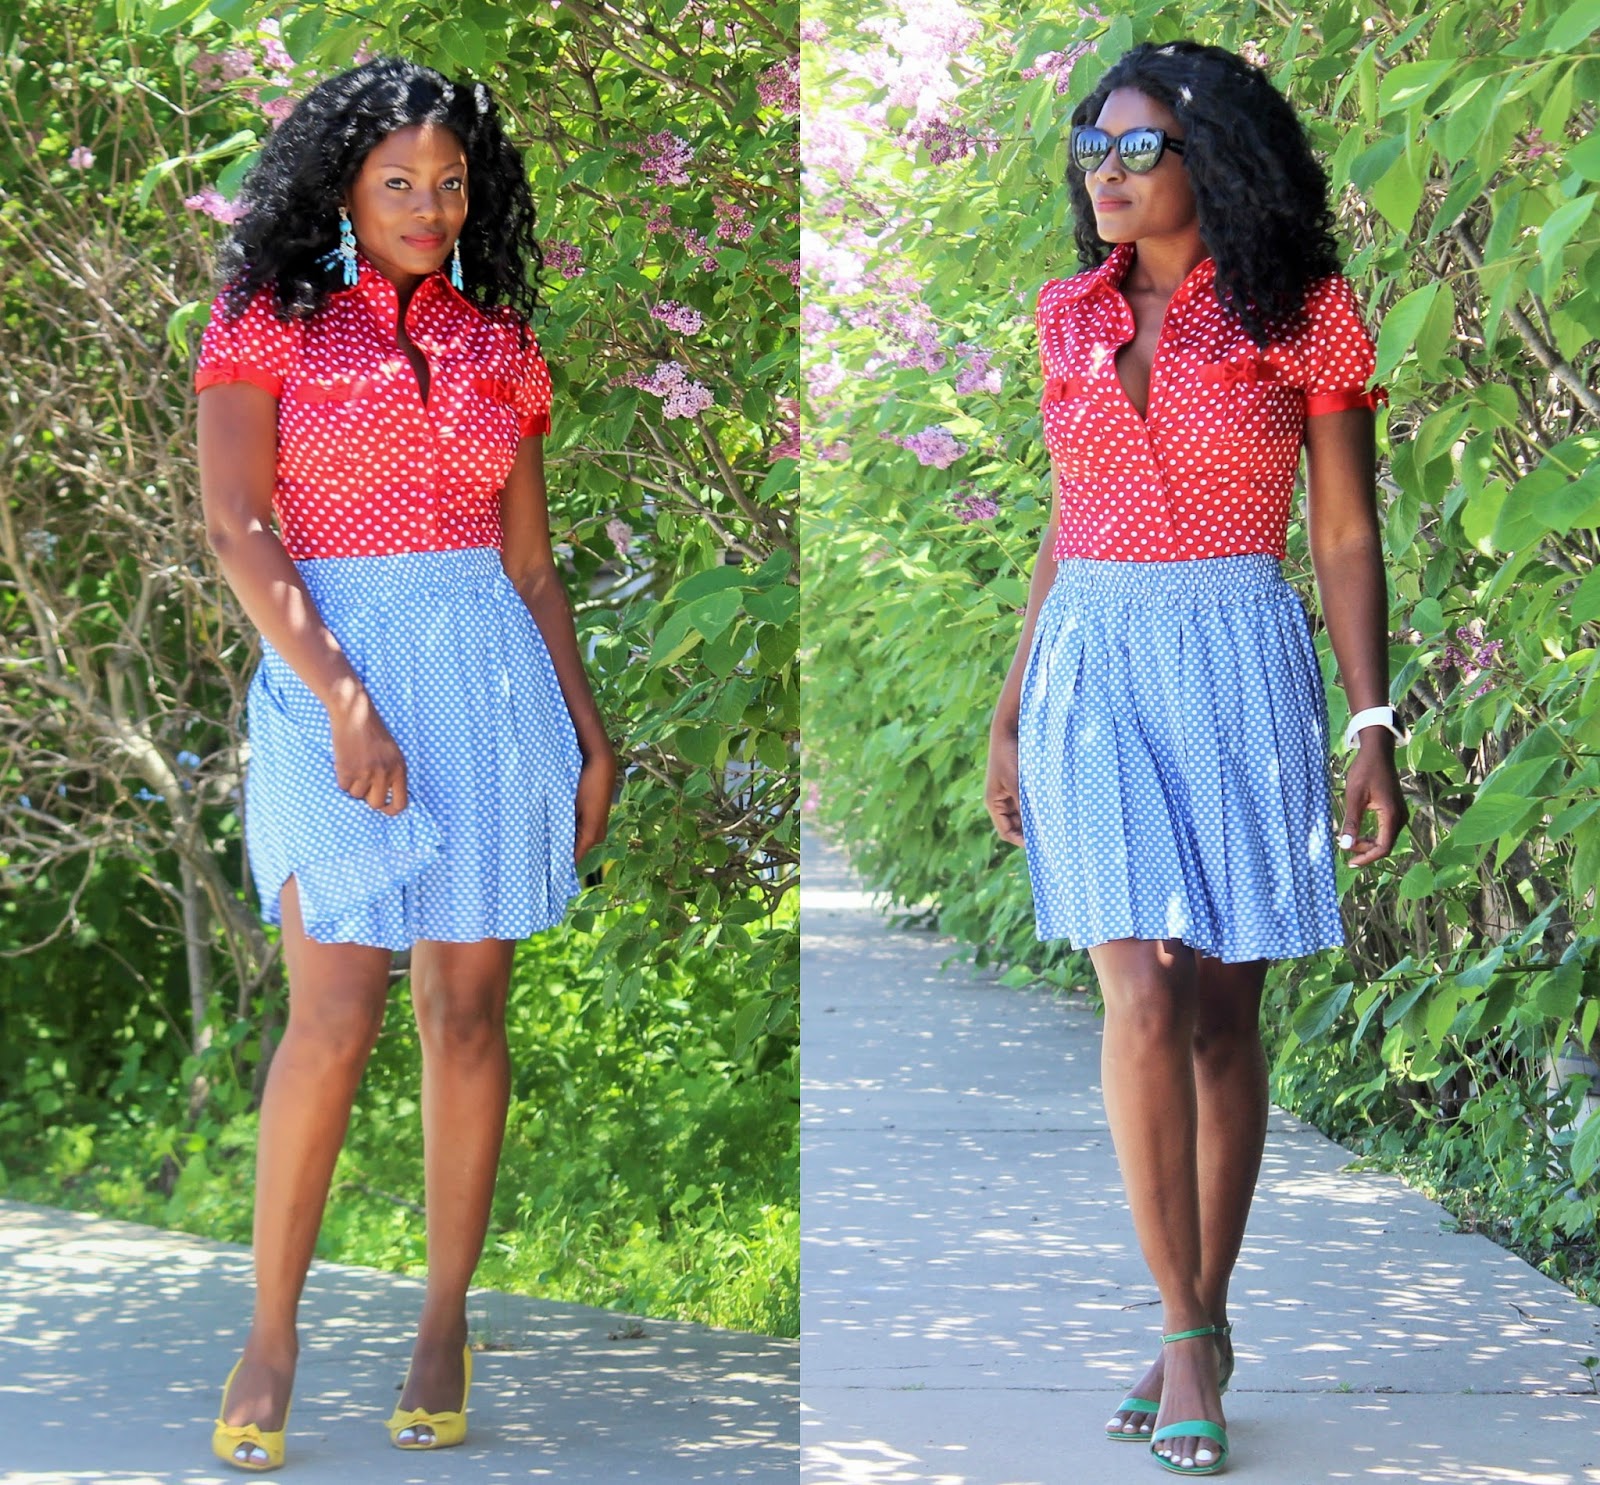 POLKA DOTS AND BOWS | 1 OUTFIT 2 DIFFERENT LOOKS